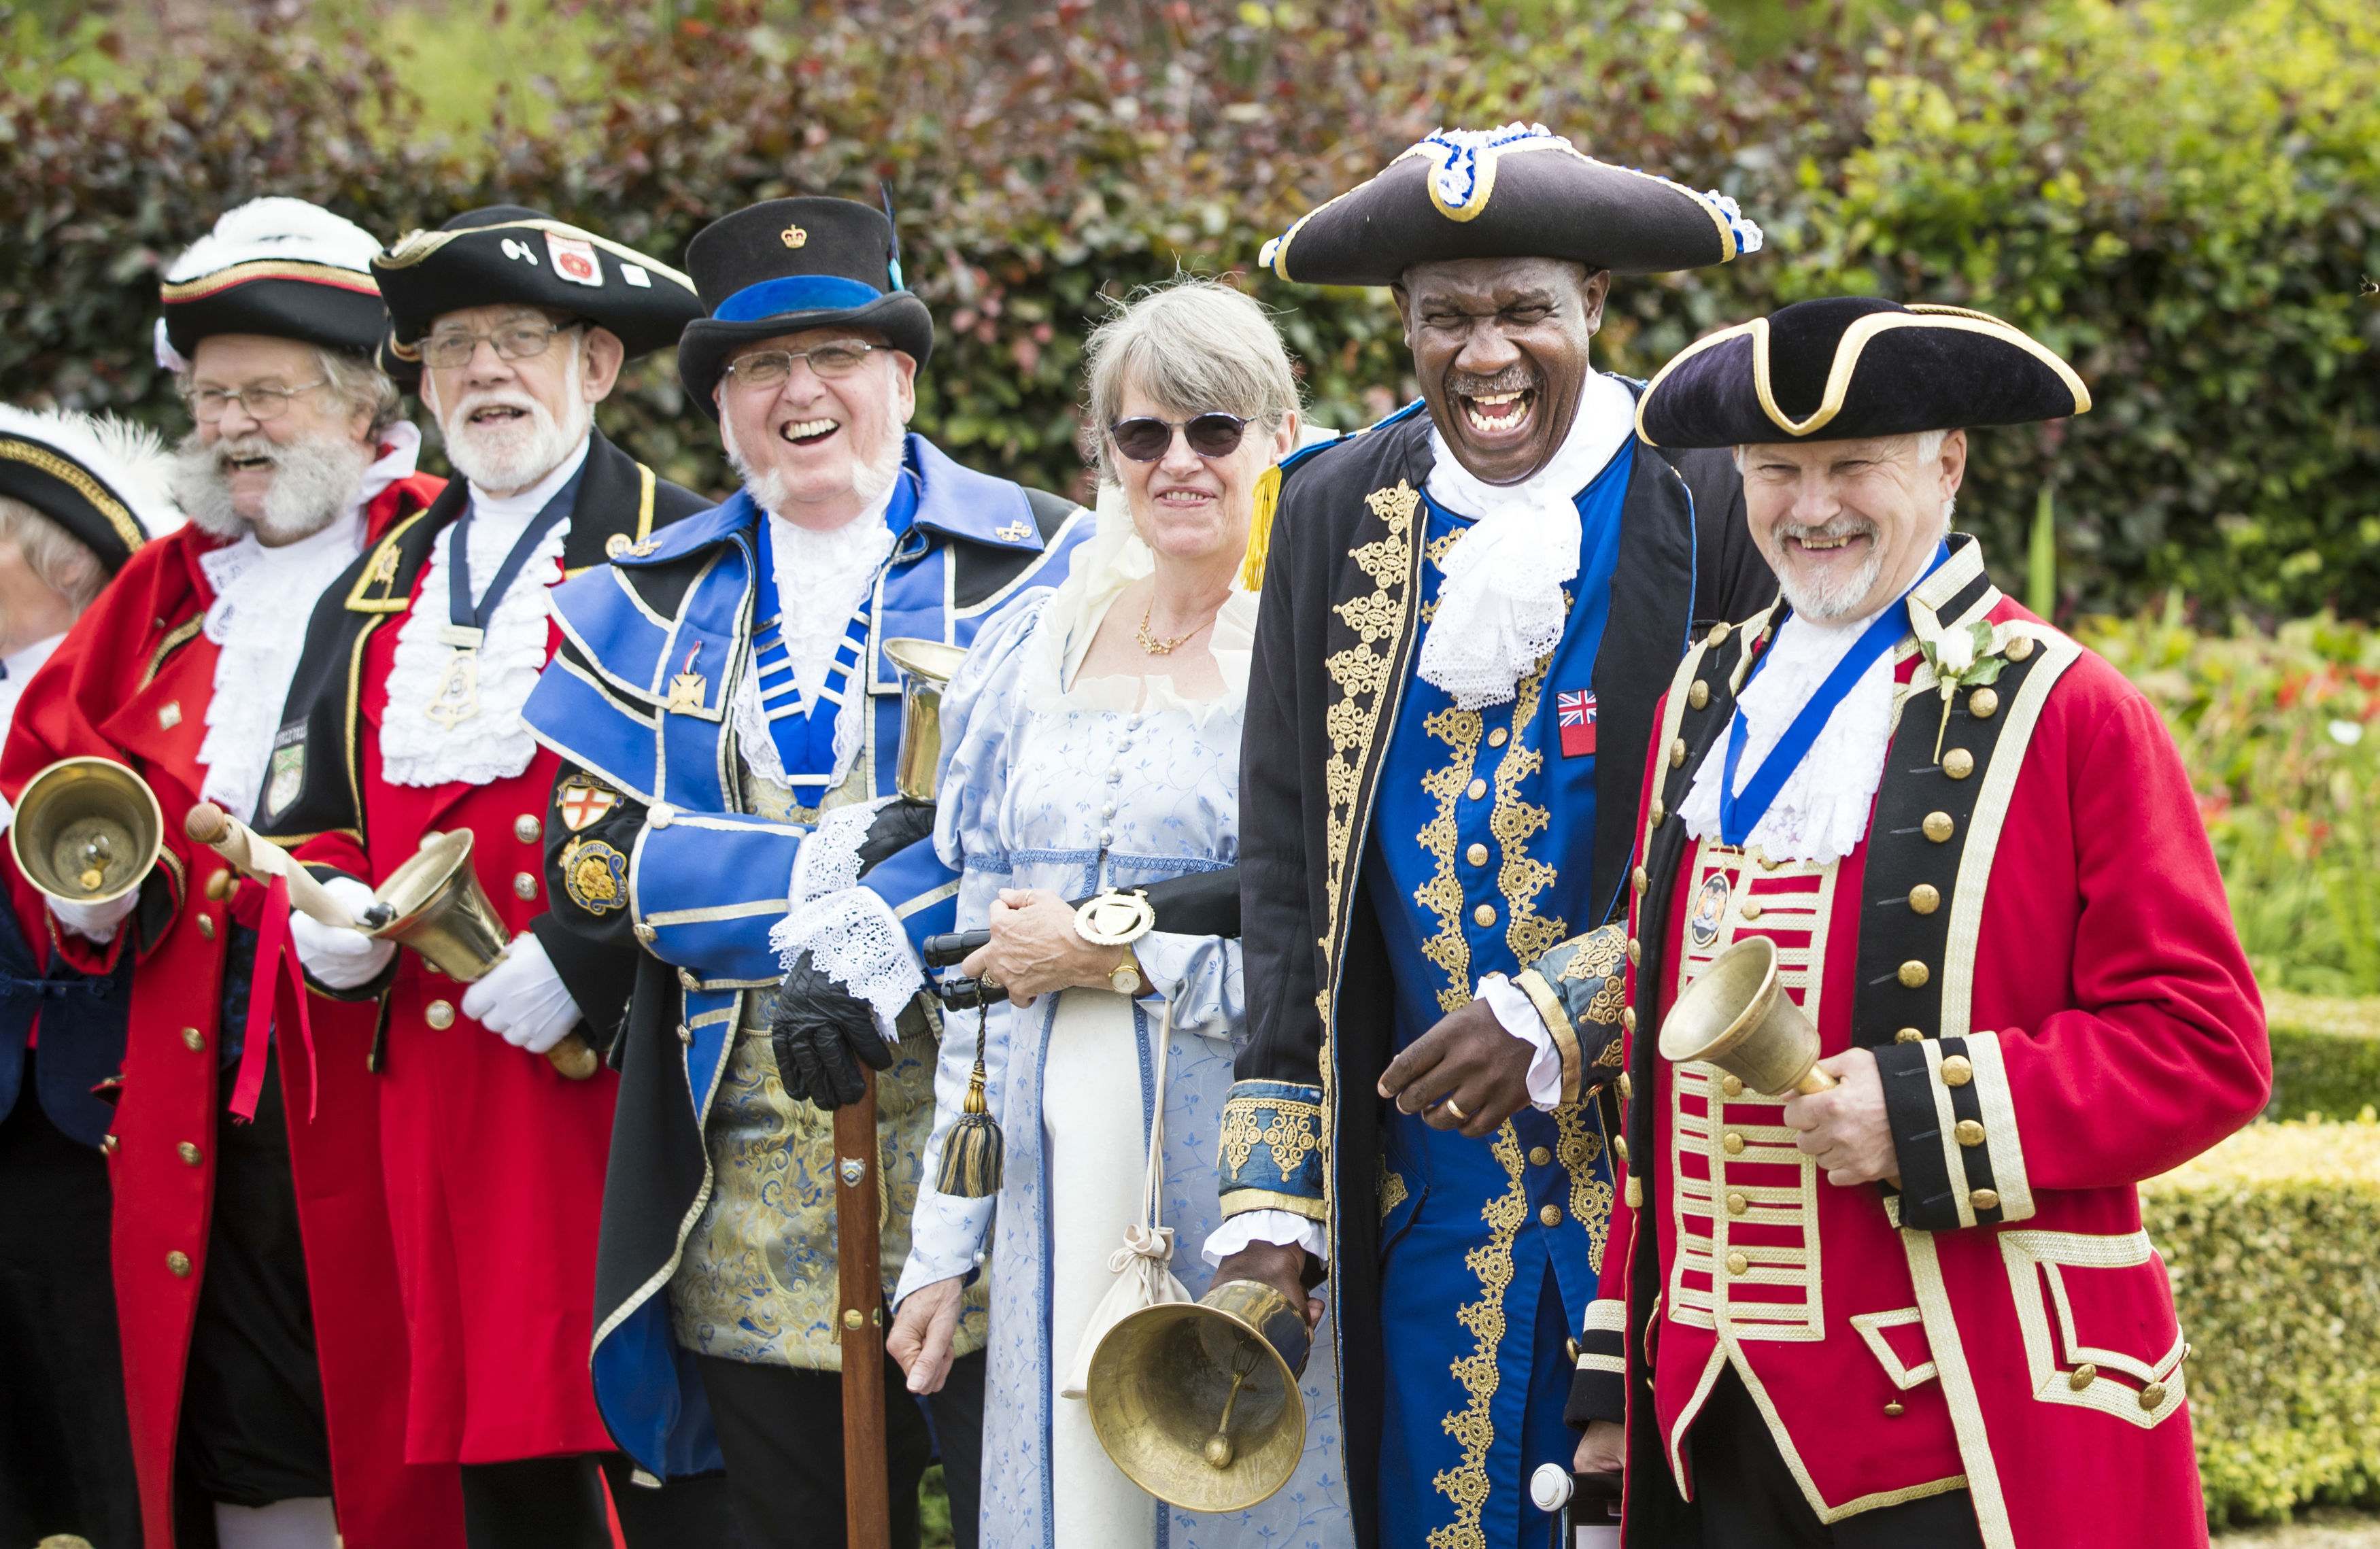 Town criers contest